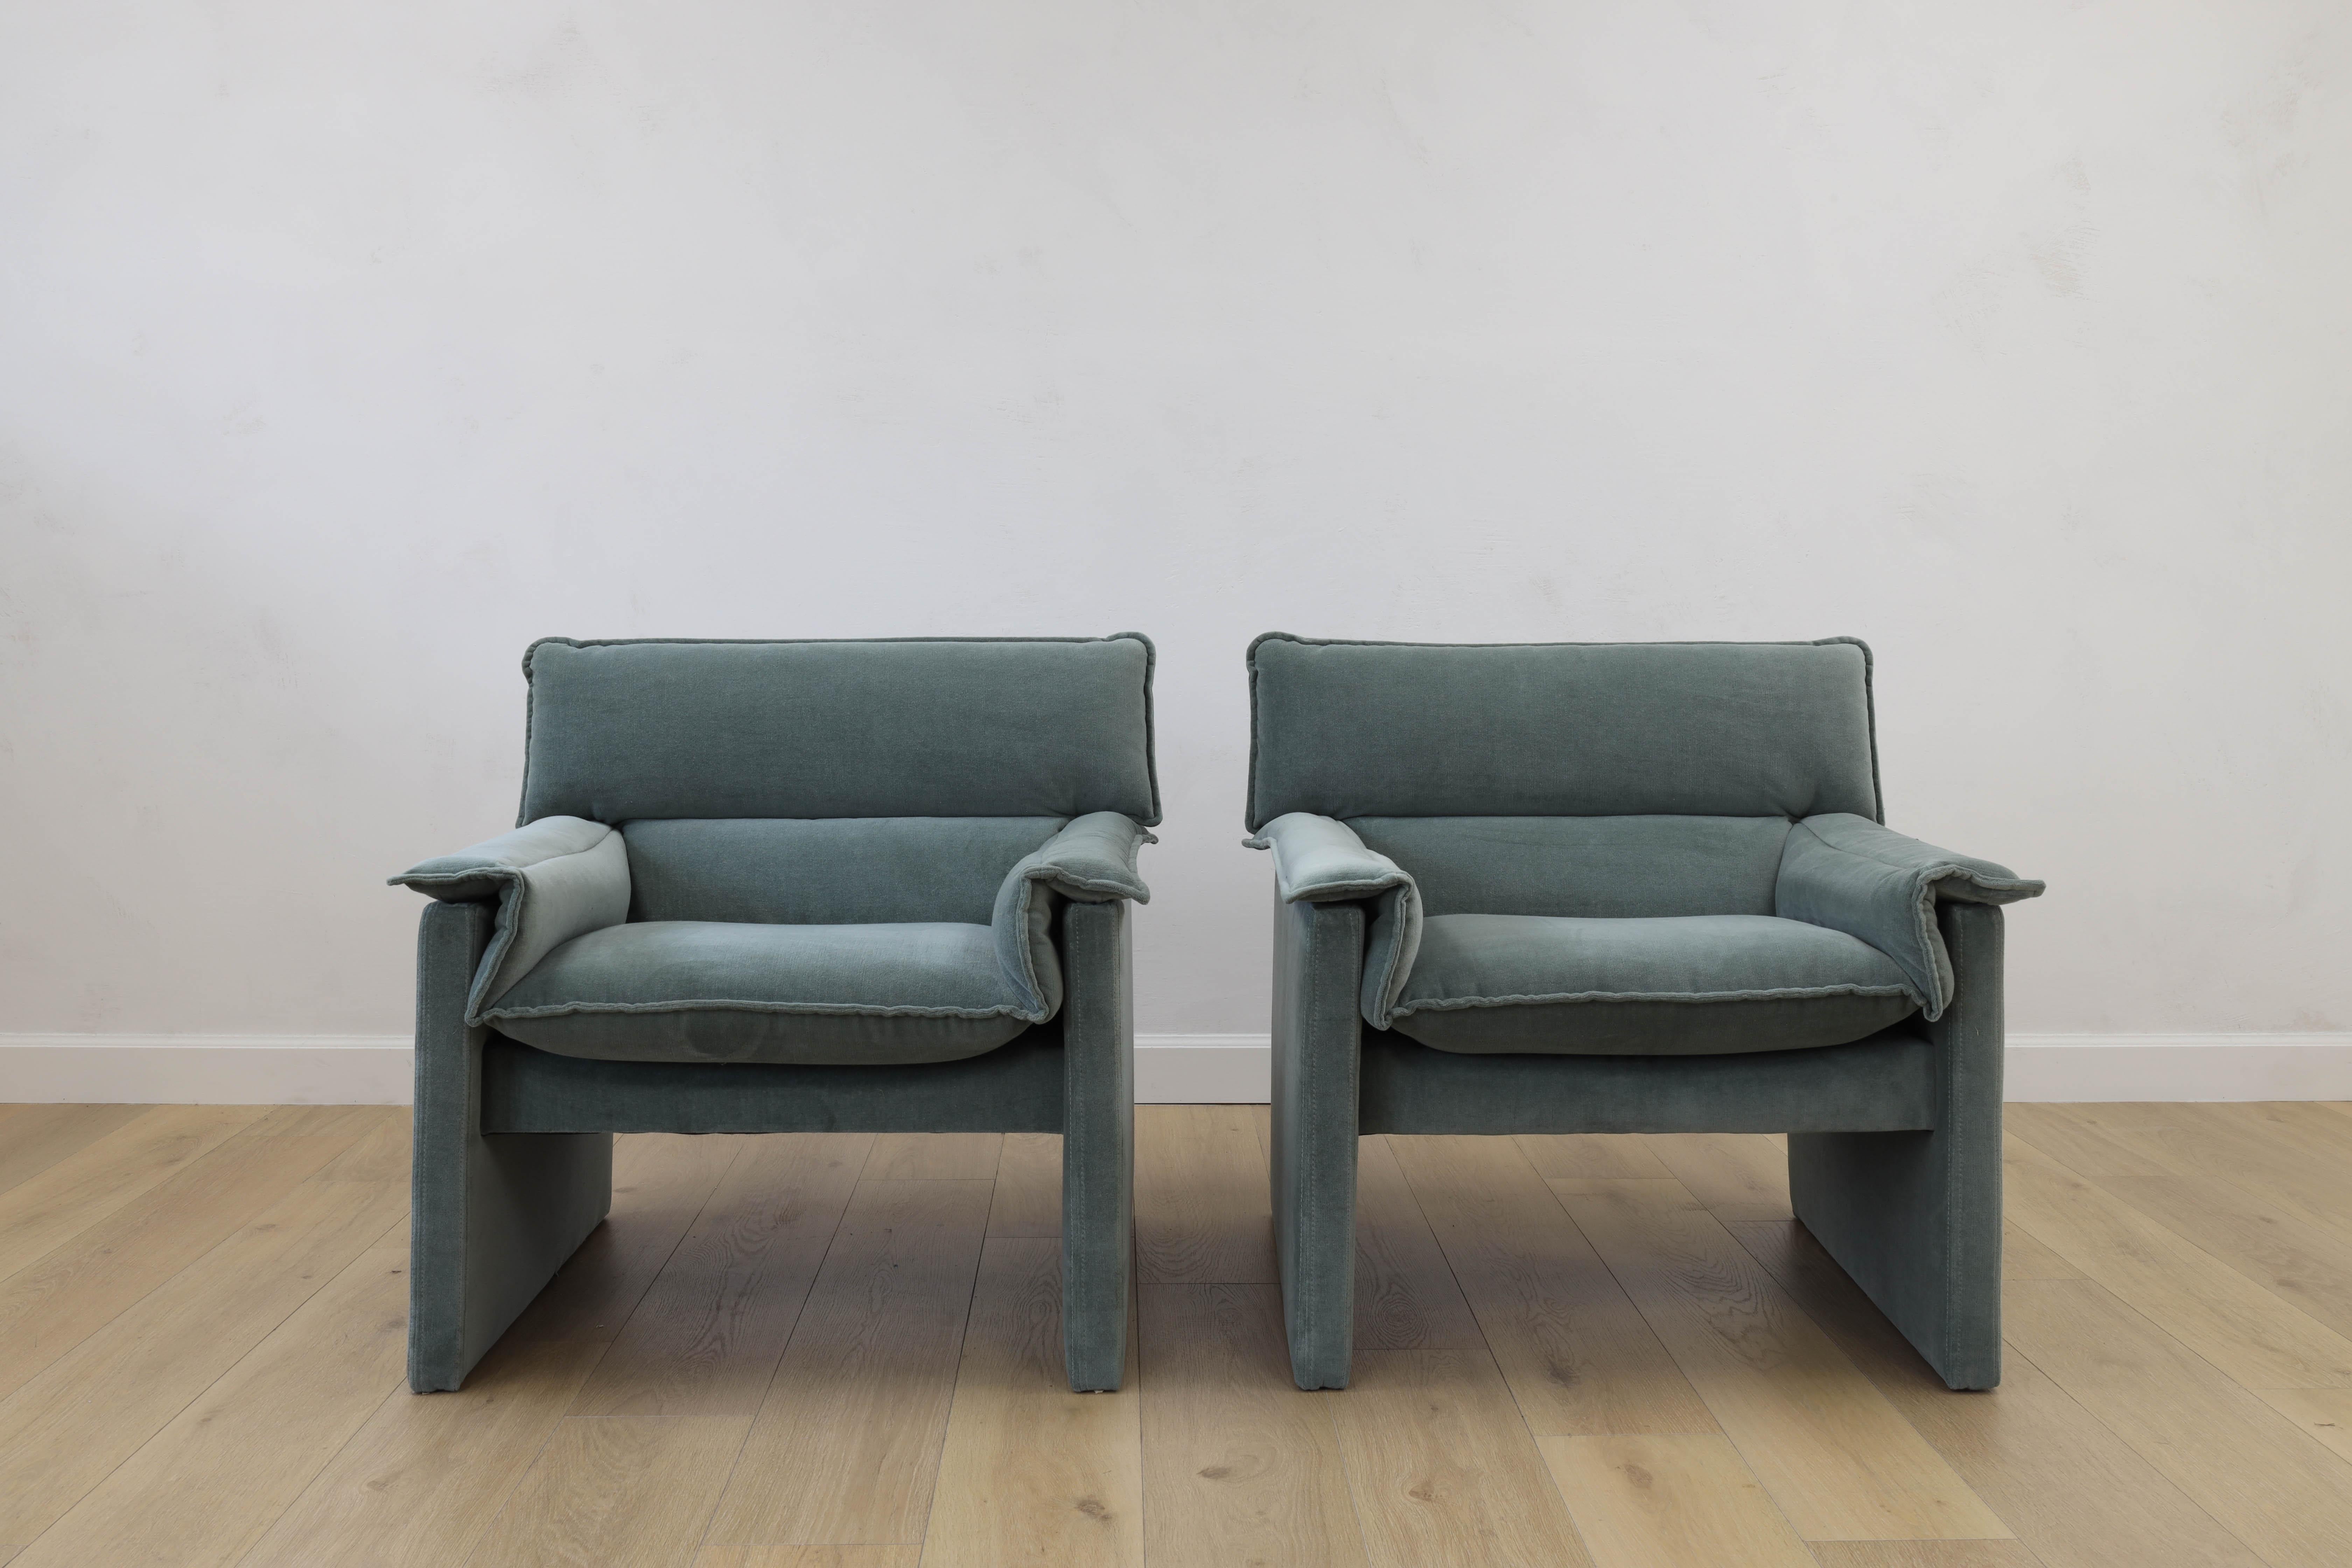 Pair of Vintage Armchairs by Preview, reupholstered in Silver Sage Velvet. This fabric is lush and has beautiful silver an blue undertones. The foam has been replaced making these the coziest chairs, perfect to snuggle up